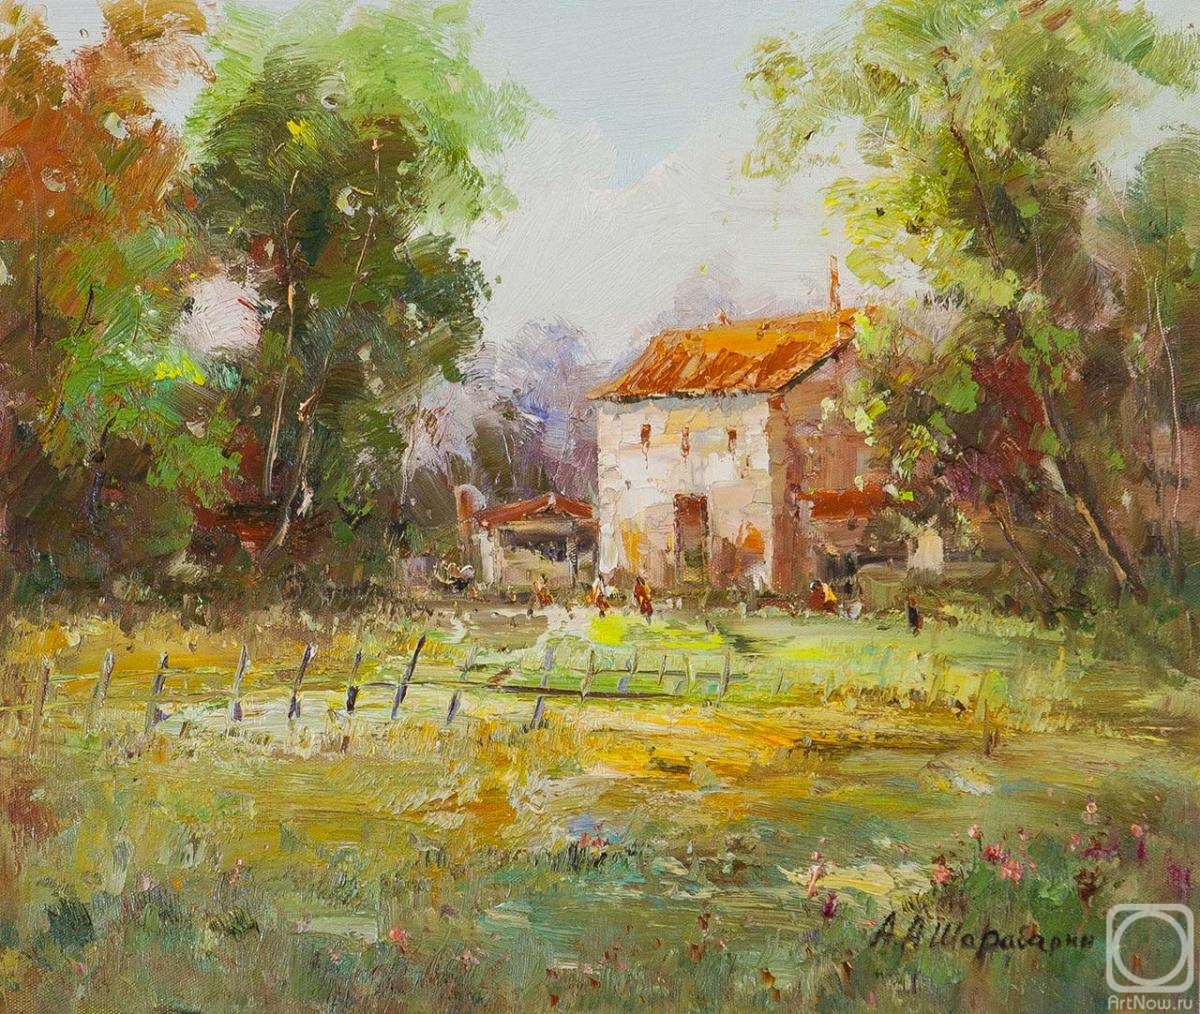 Sharabarin Andrey. A little pastoral. Version AS. Etude two